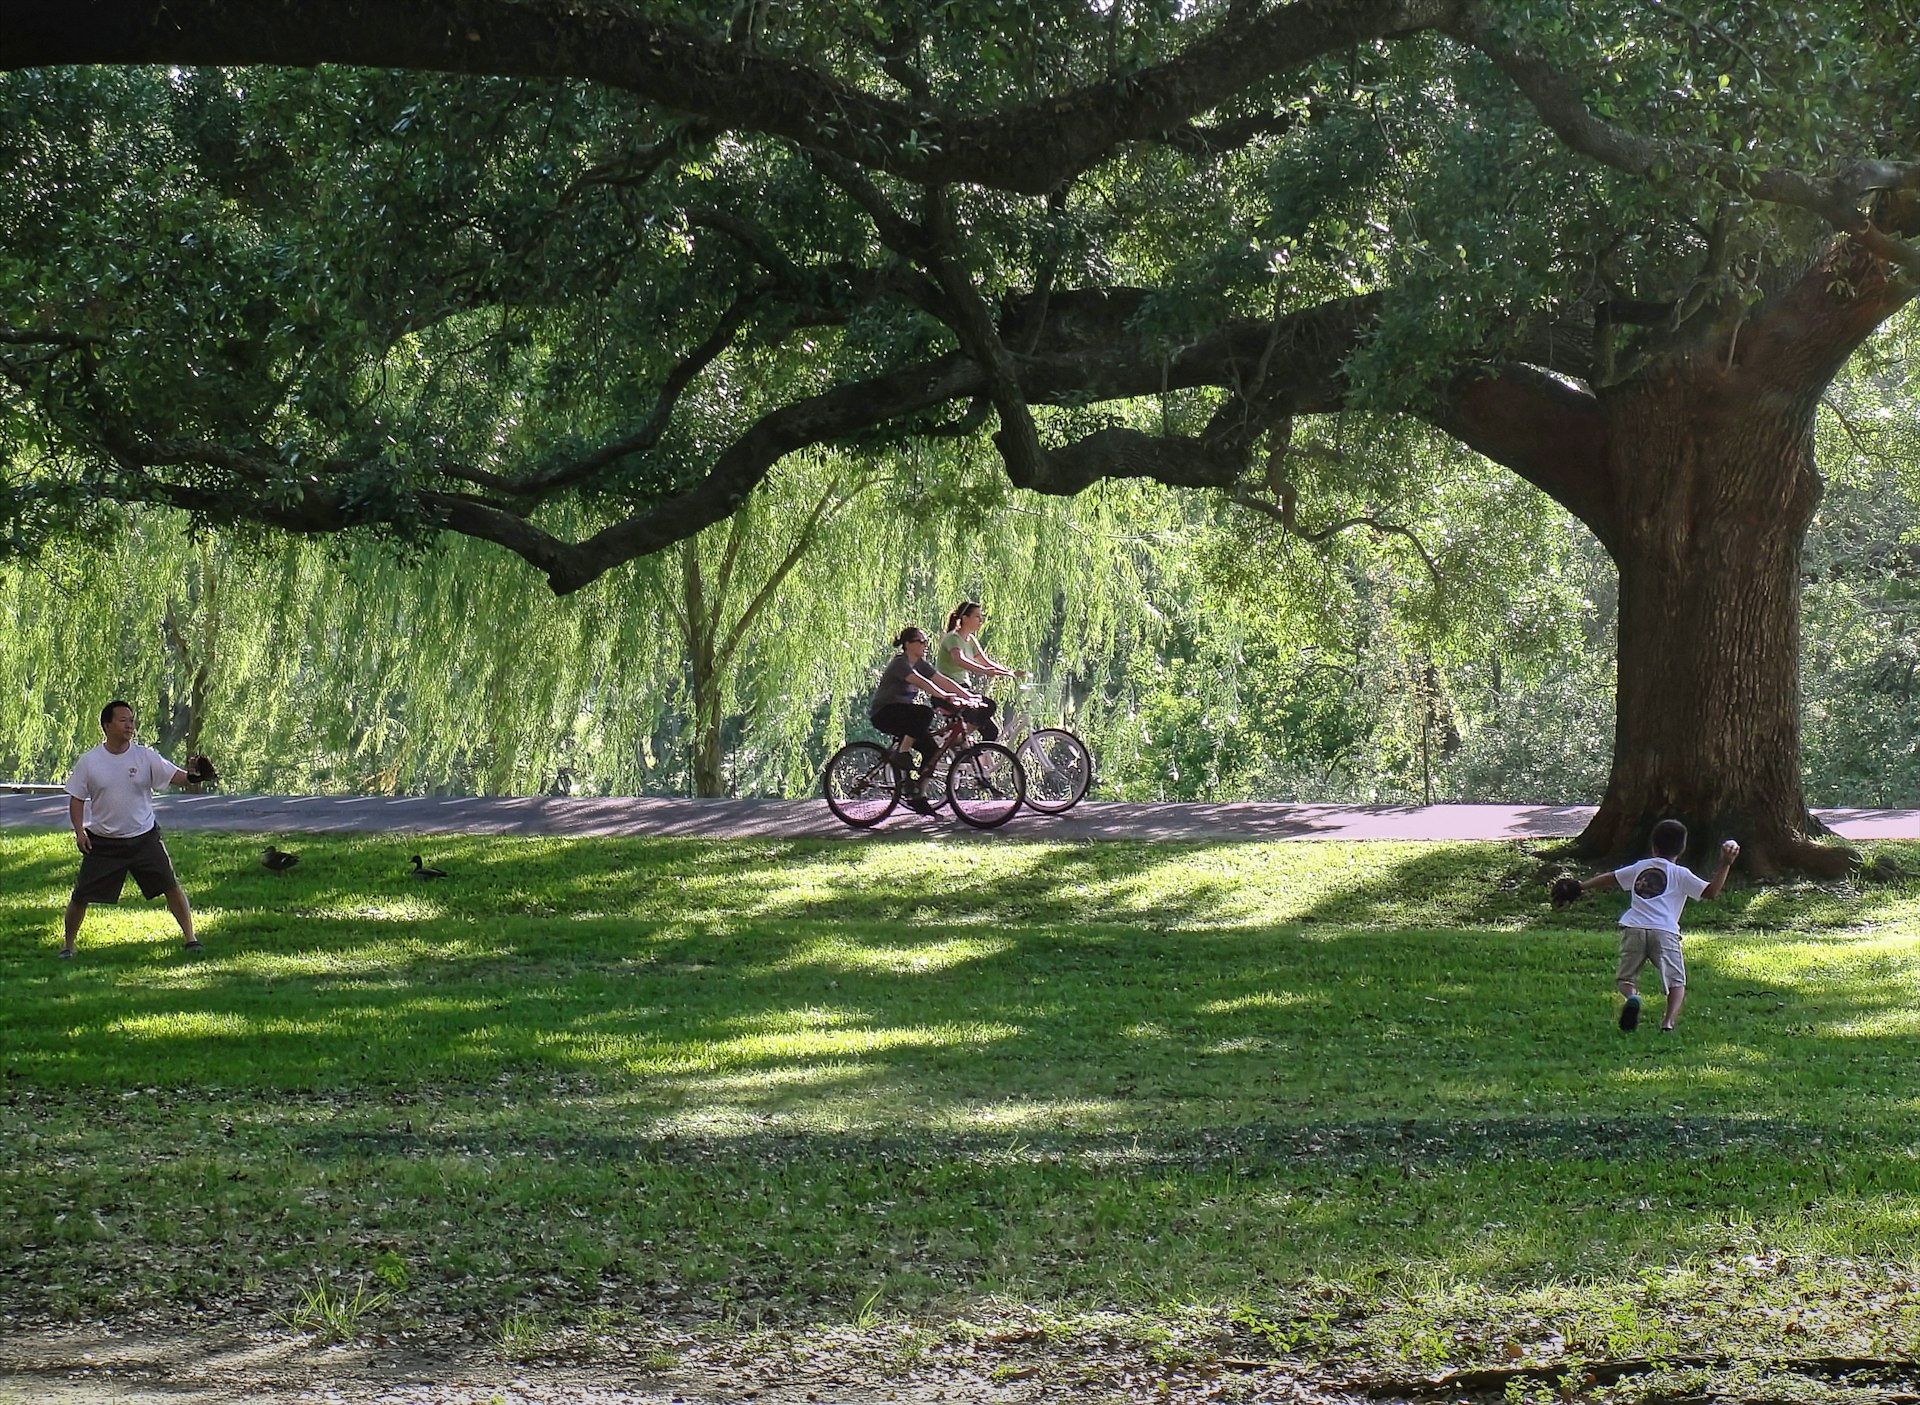 An adult and child play baseball while two cyclists ride by in parkland